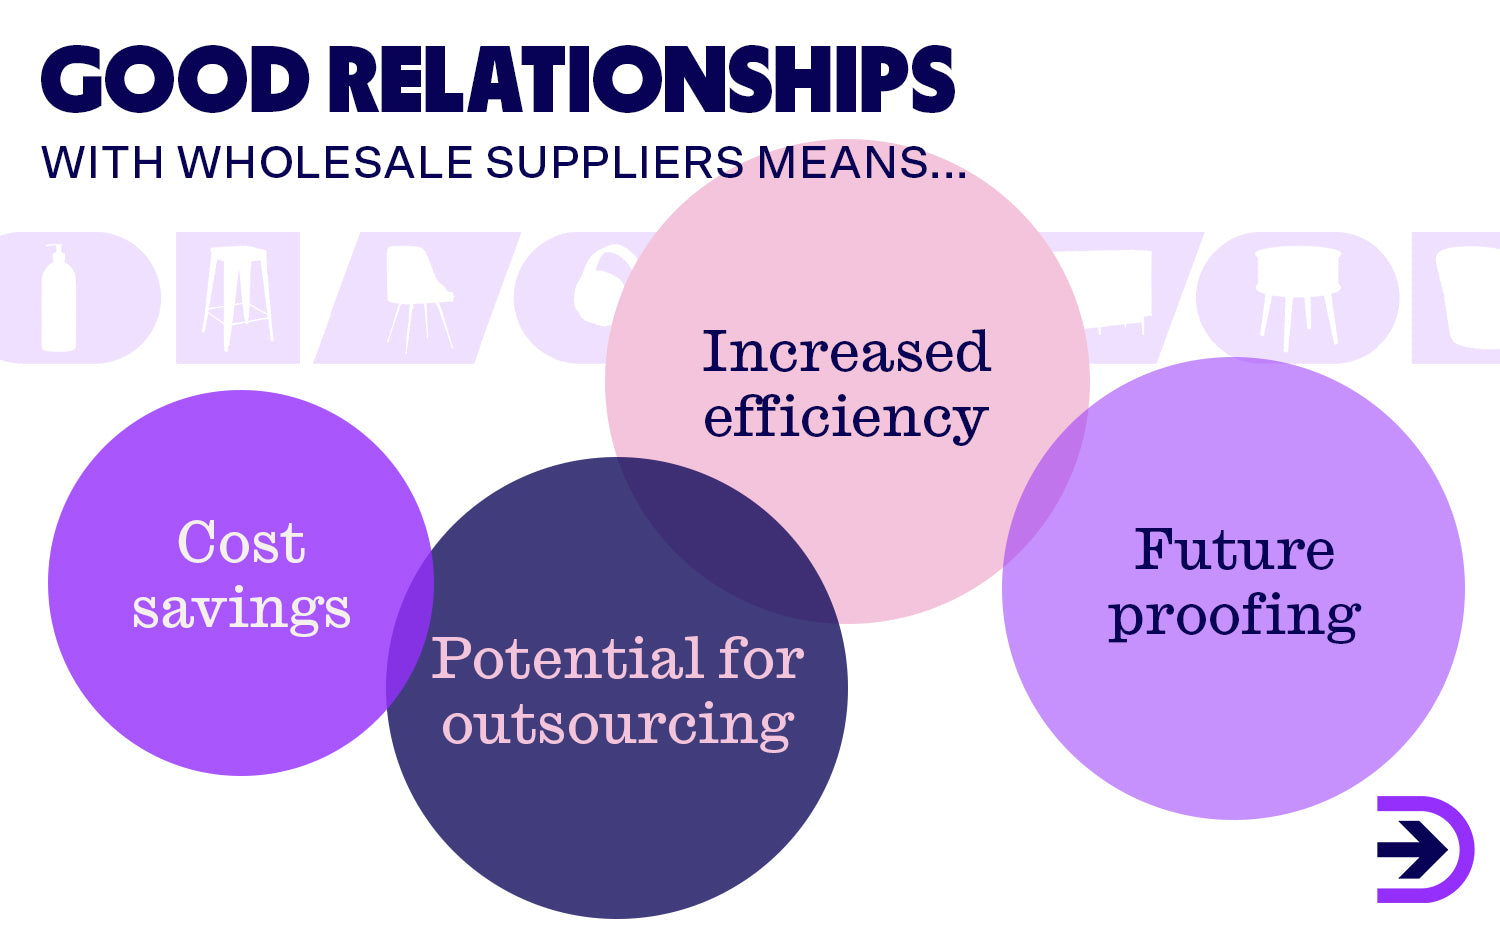 Maintaining a good relationship with wholesale suppliers can be rewarding with increased efficiency and cost savings, amongst other benefits.